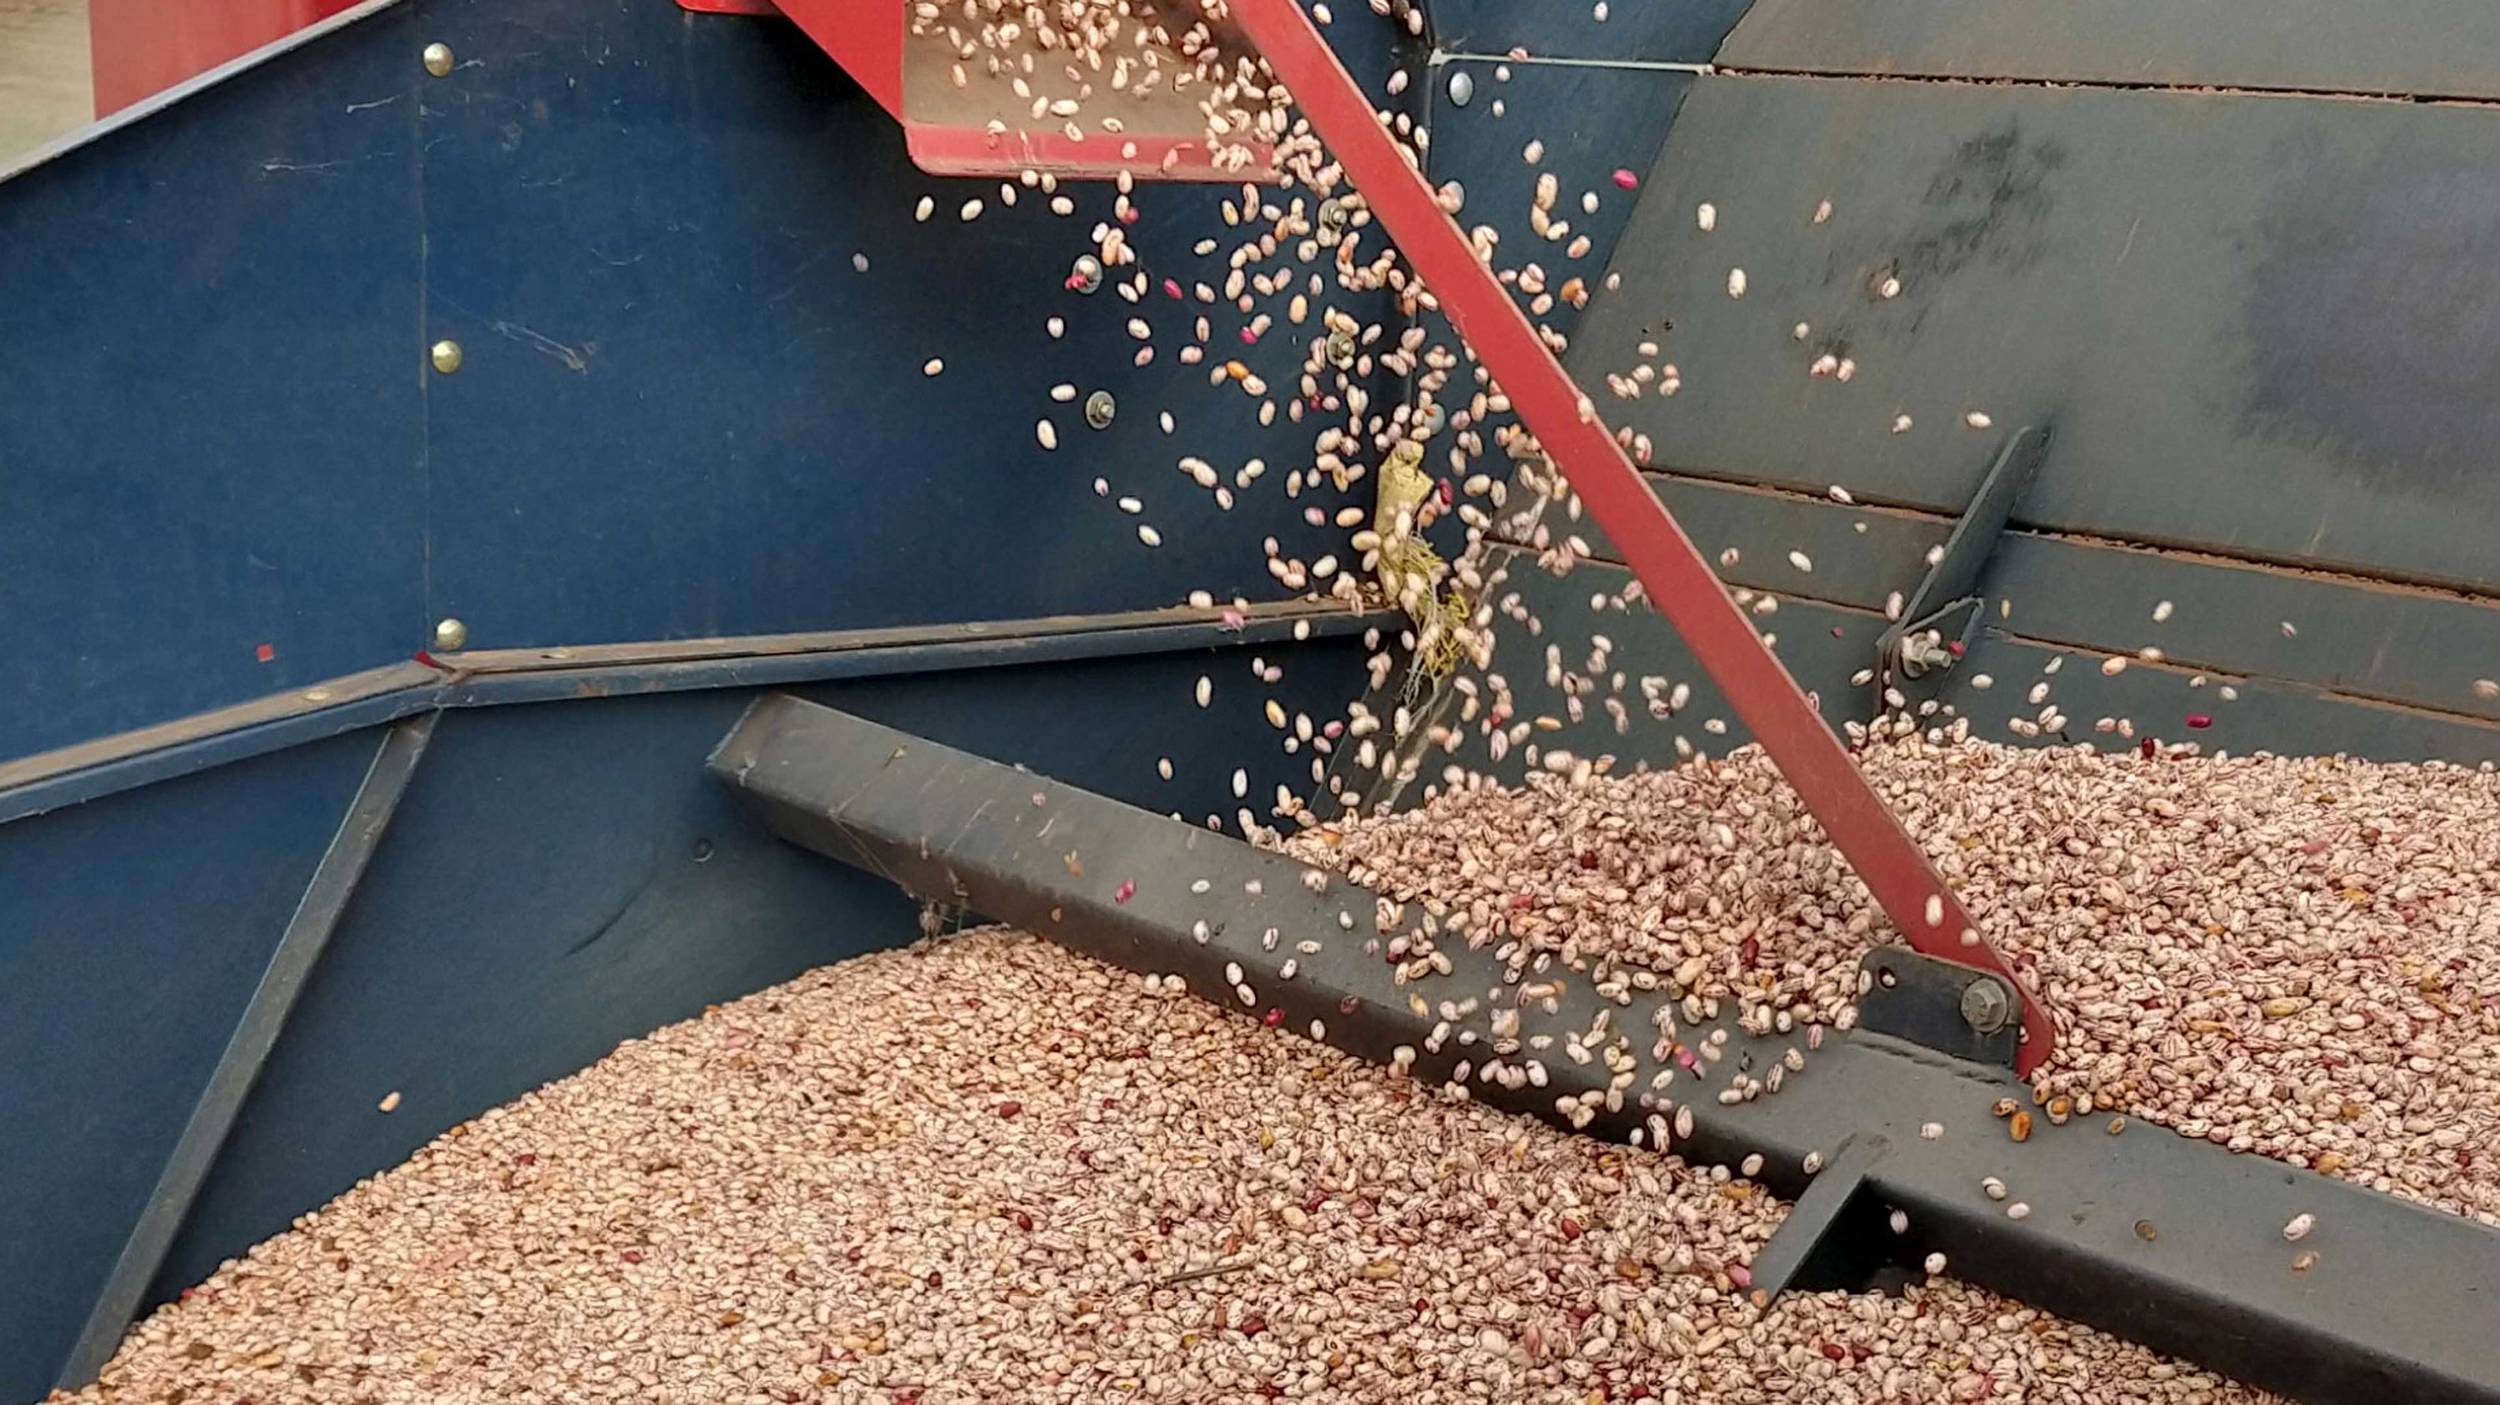 When processing cranberry beans, Cono pays attention to consistently high quality.